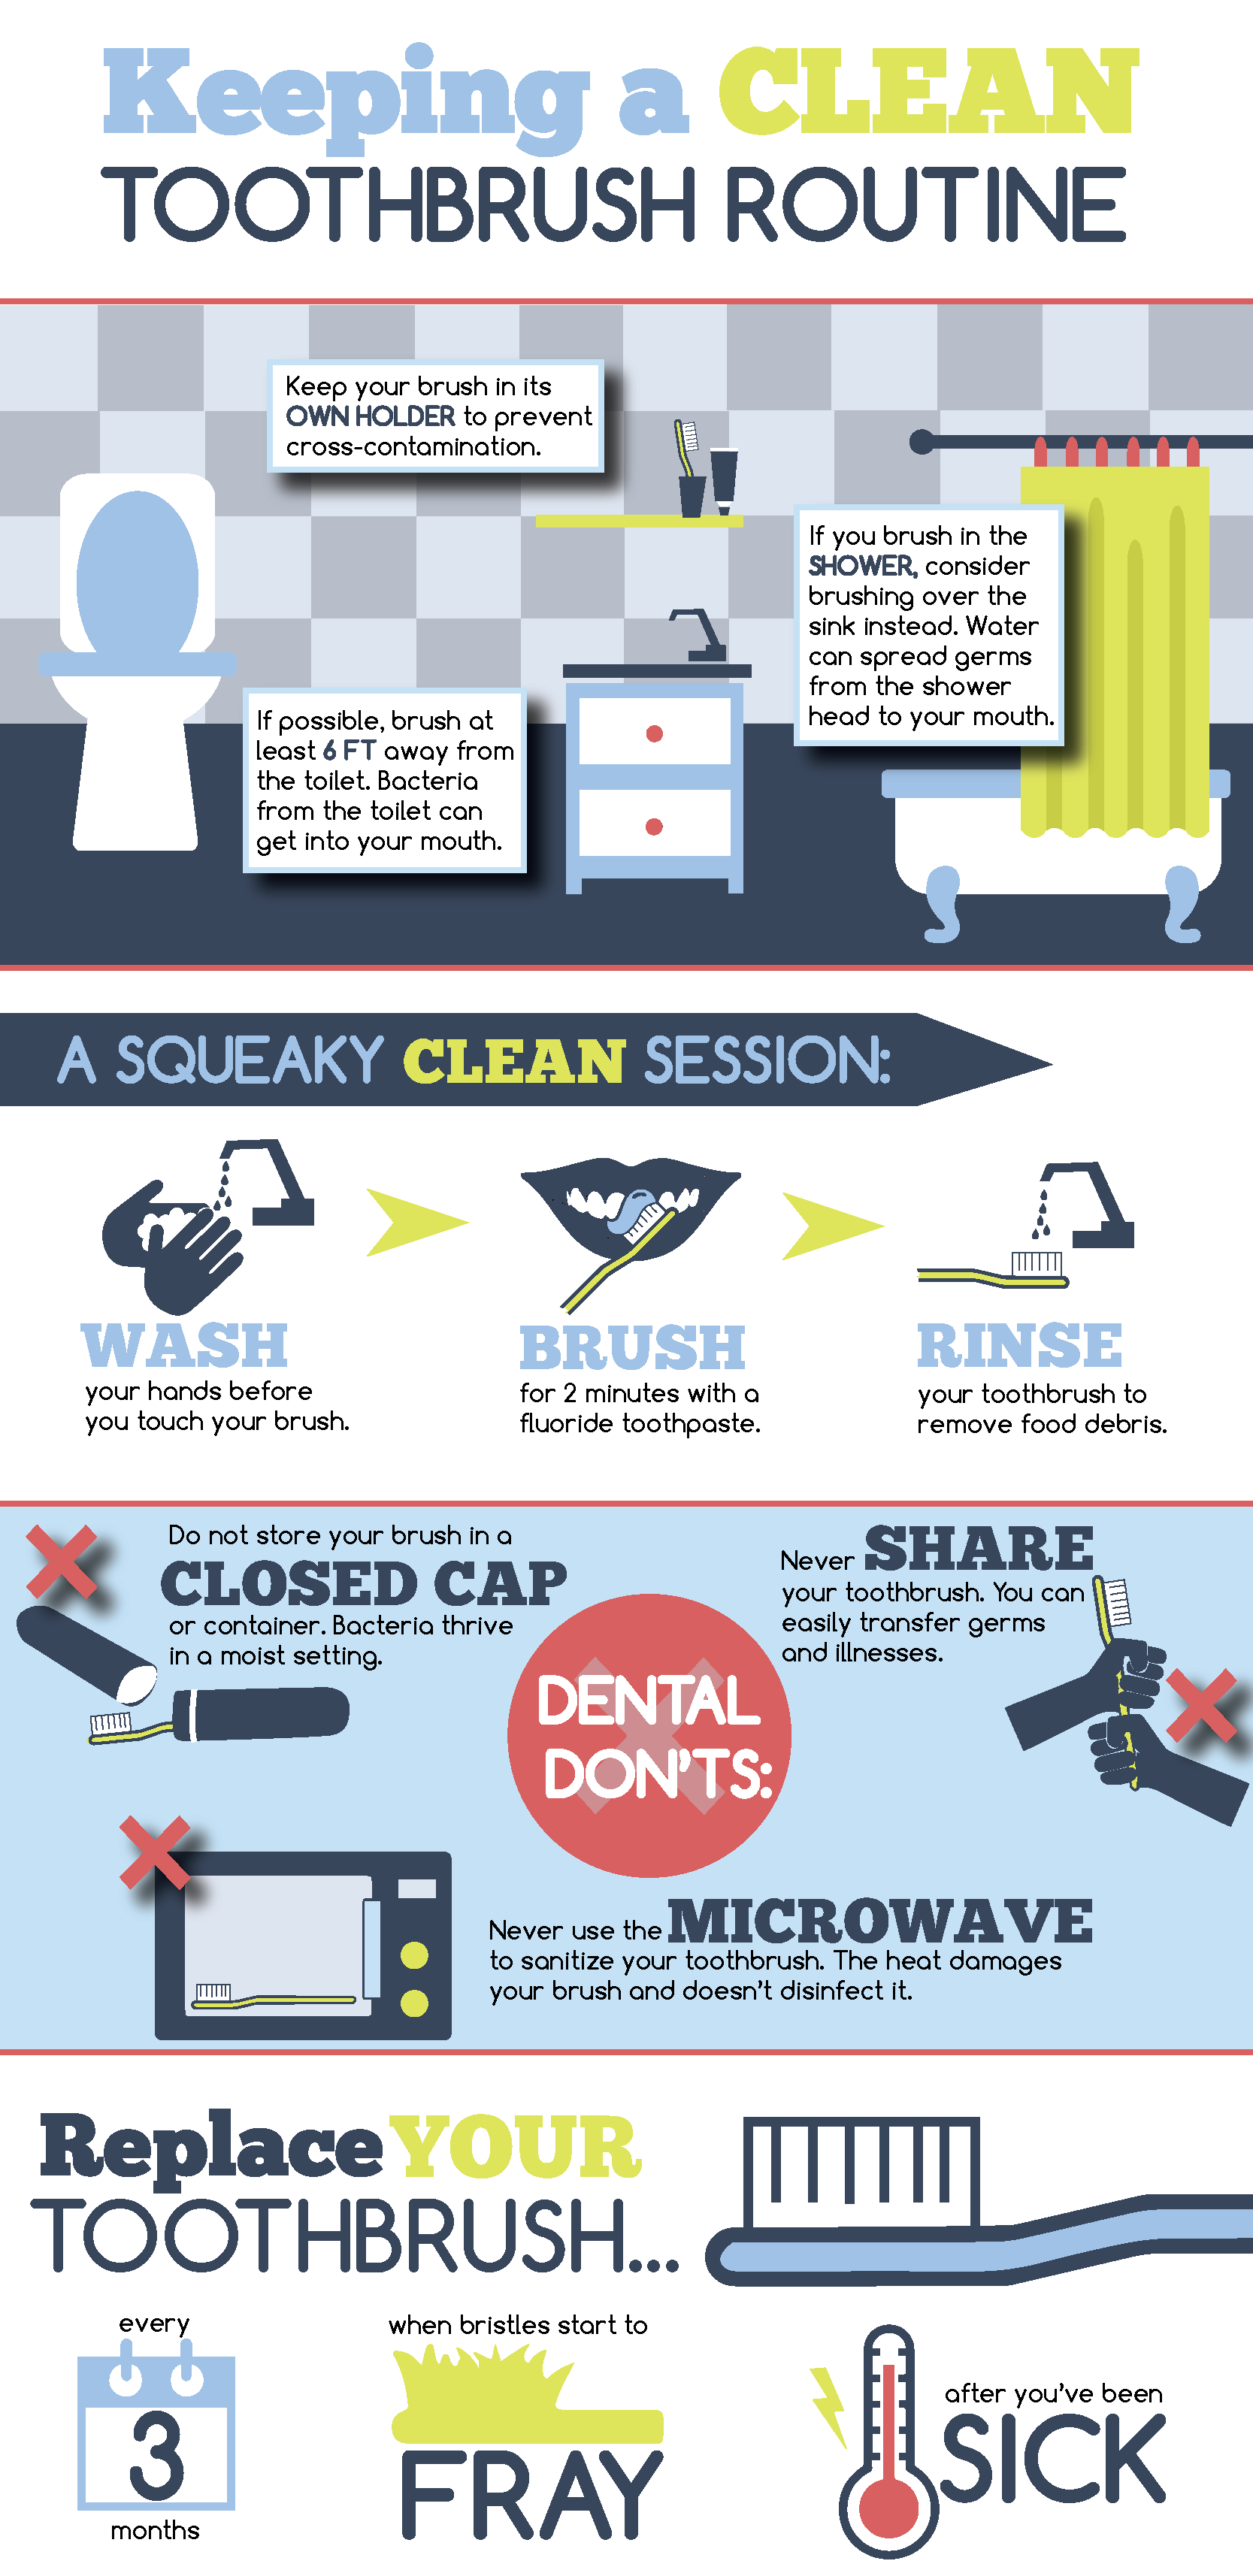 Full Infographic for Keeping A Clean Toothbrush Routine